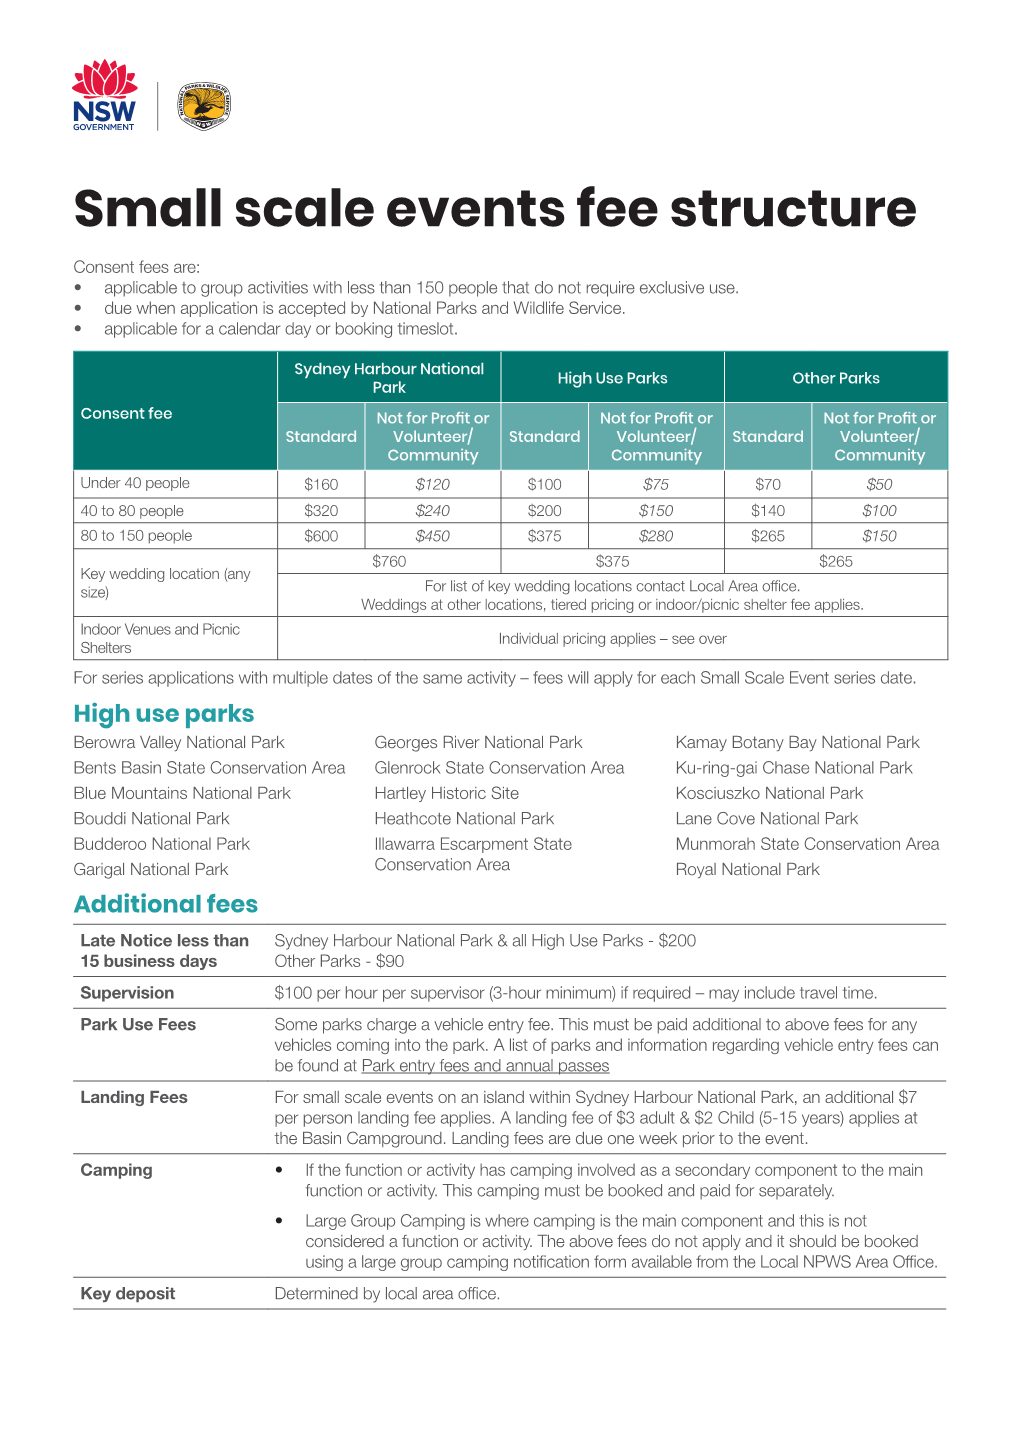 NPWS Small Scale Event Application Form